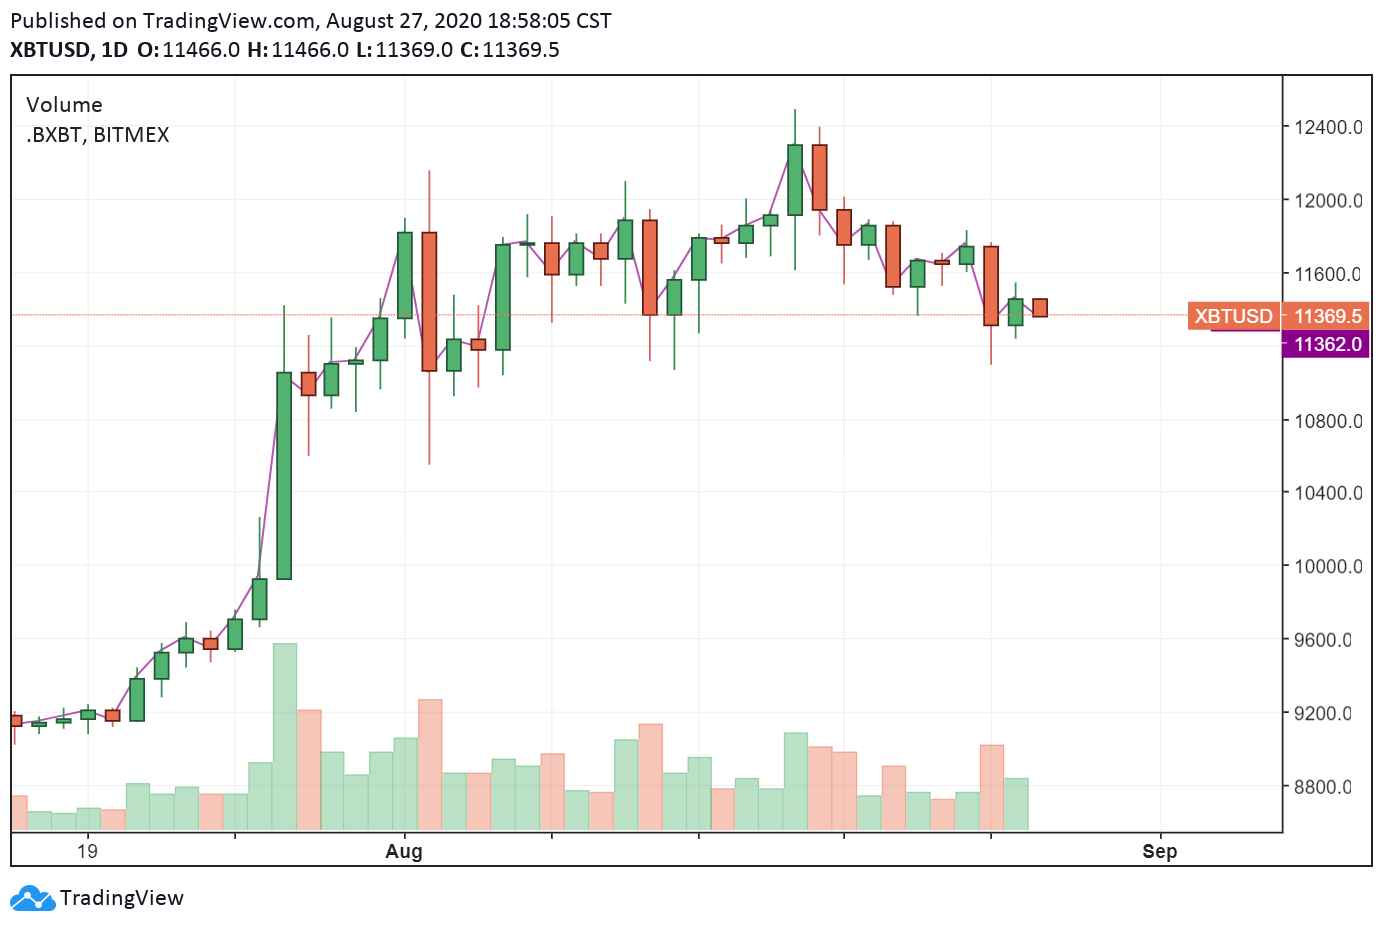 The daily price chart of Bitcoin